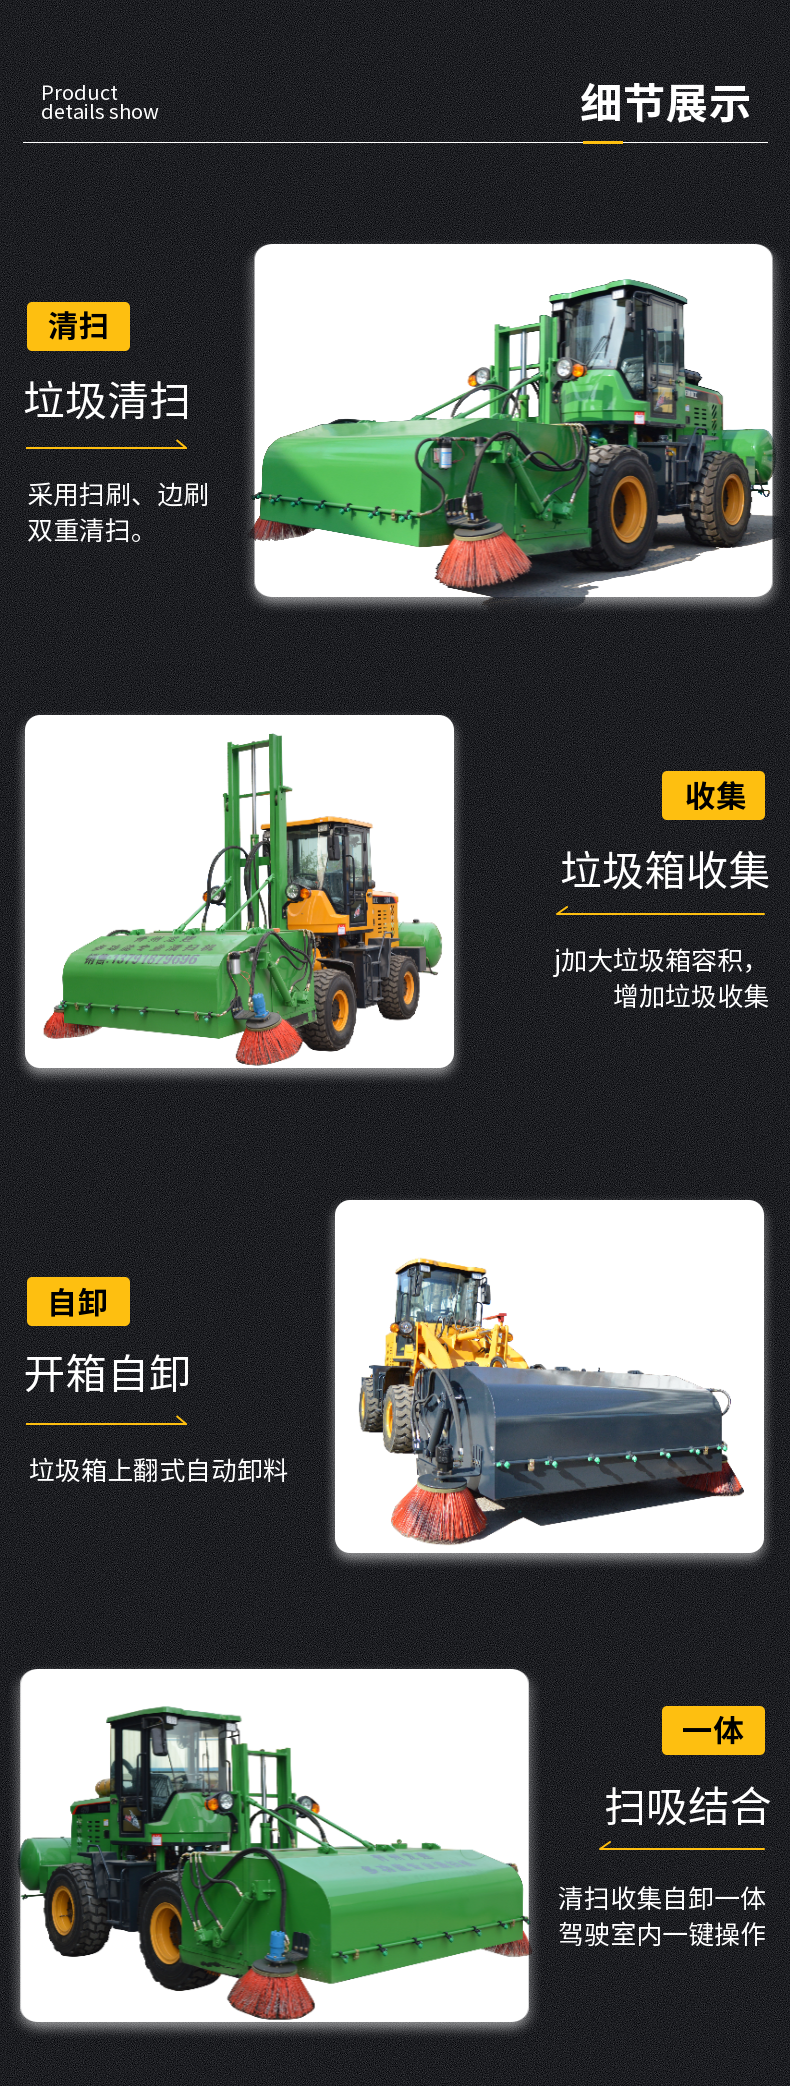 Road Construction Sweeper Driving SM Sweeper Powerful Rolling Brush of Industrial Sweeper at Longjian Steel Plant